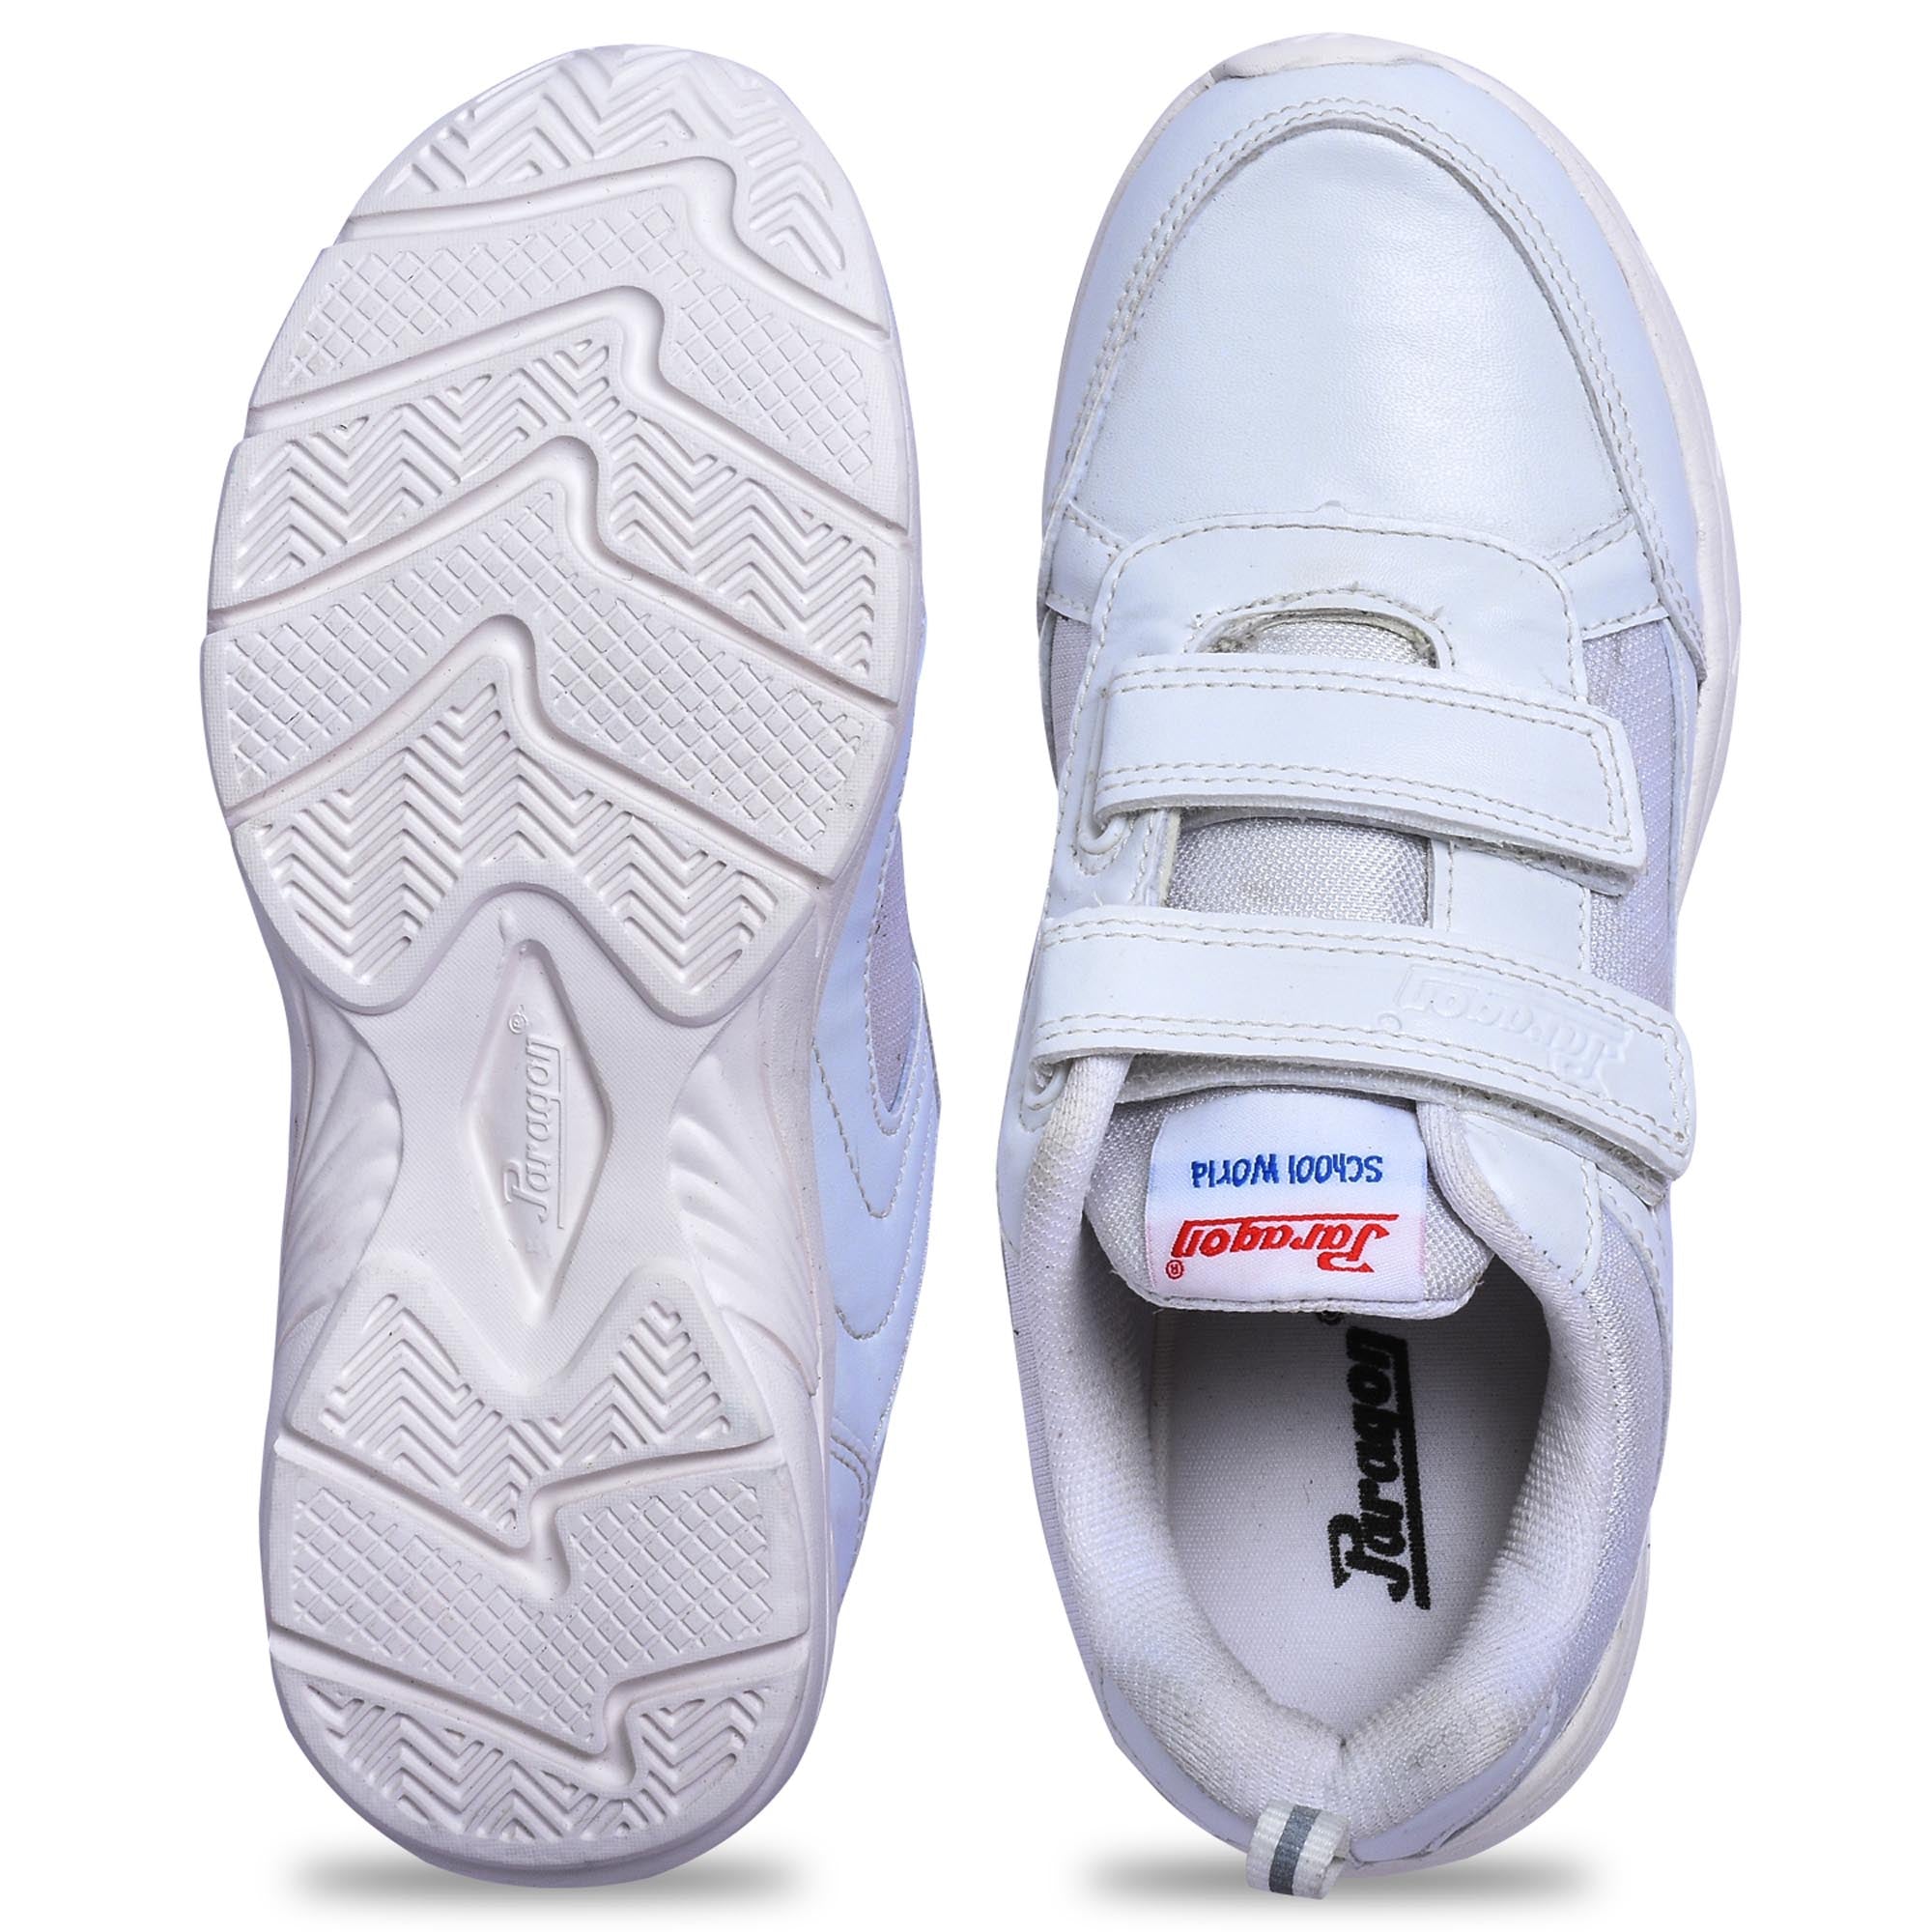 Paragon FBK0774B Kids Boys Girls School Shoes Comfortable Cushioned Soles | Durable | Daily &amp; Occasion wear White